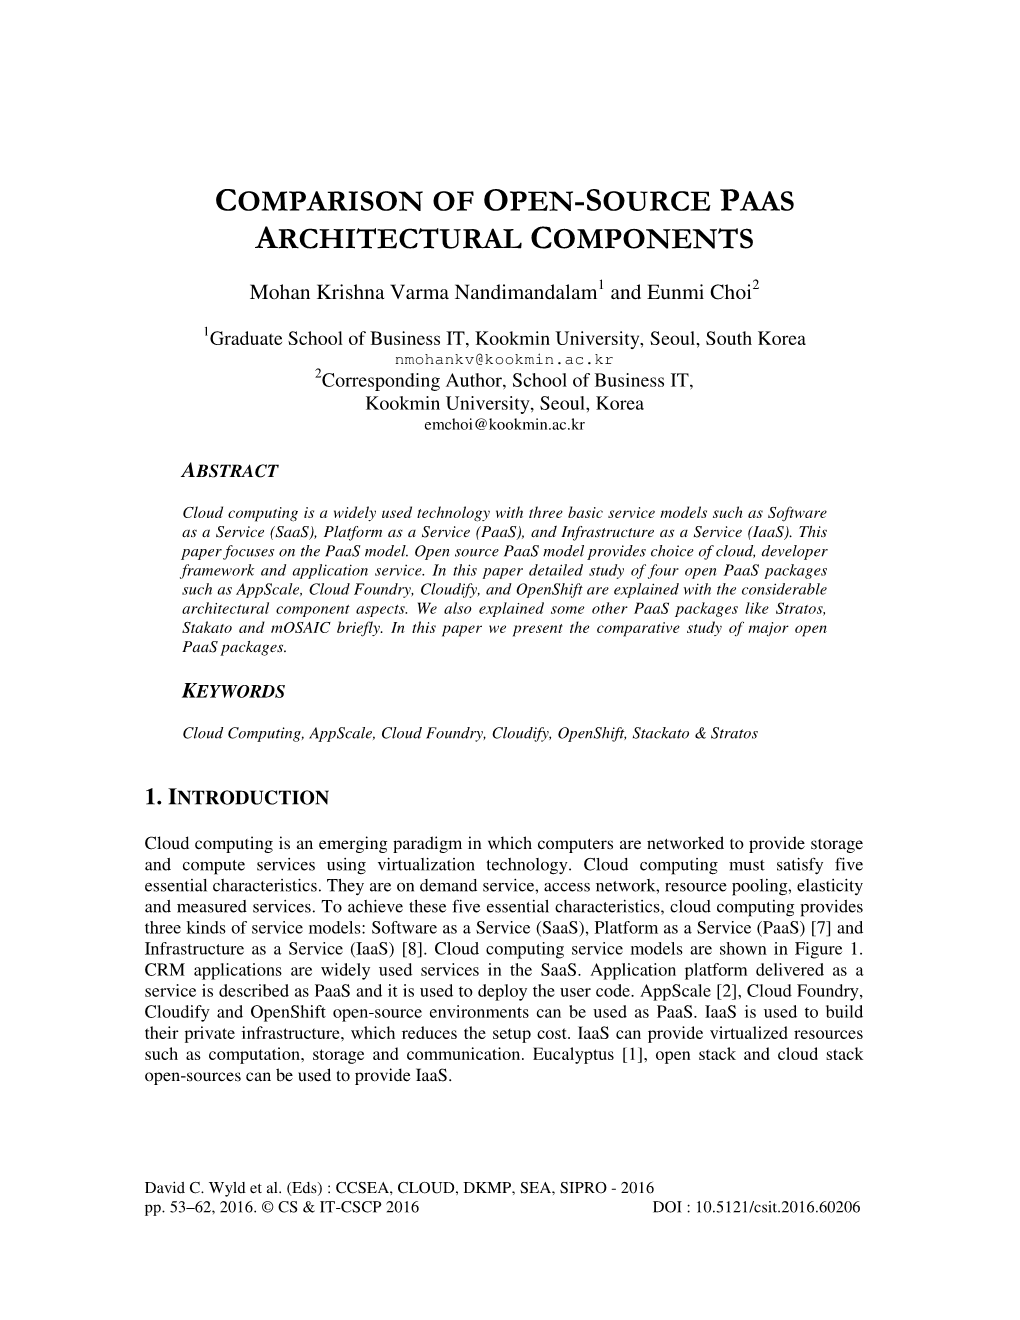 Comparison of Open-Source Paas Architectural